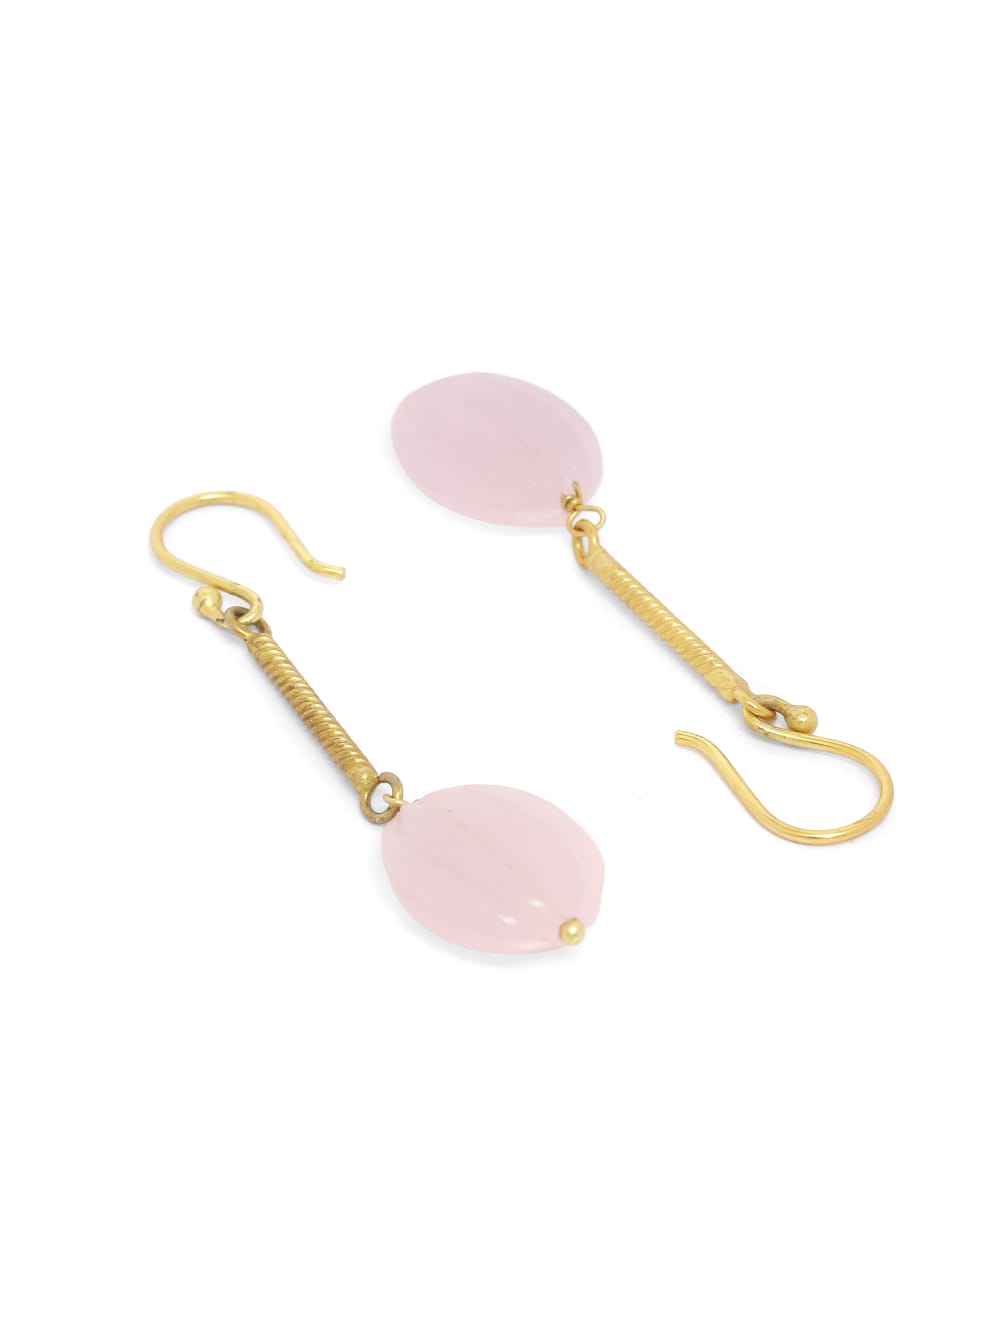 92.5 sterling silver gold plated pink chalcy hook earrings.